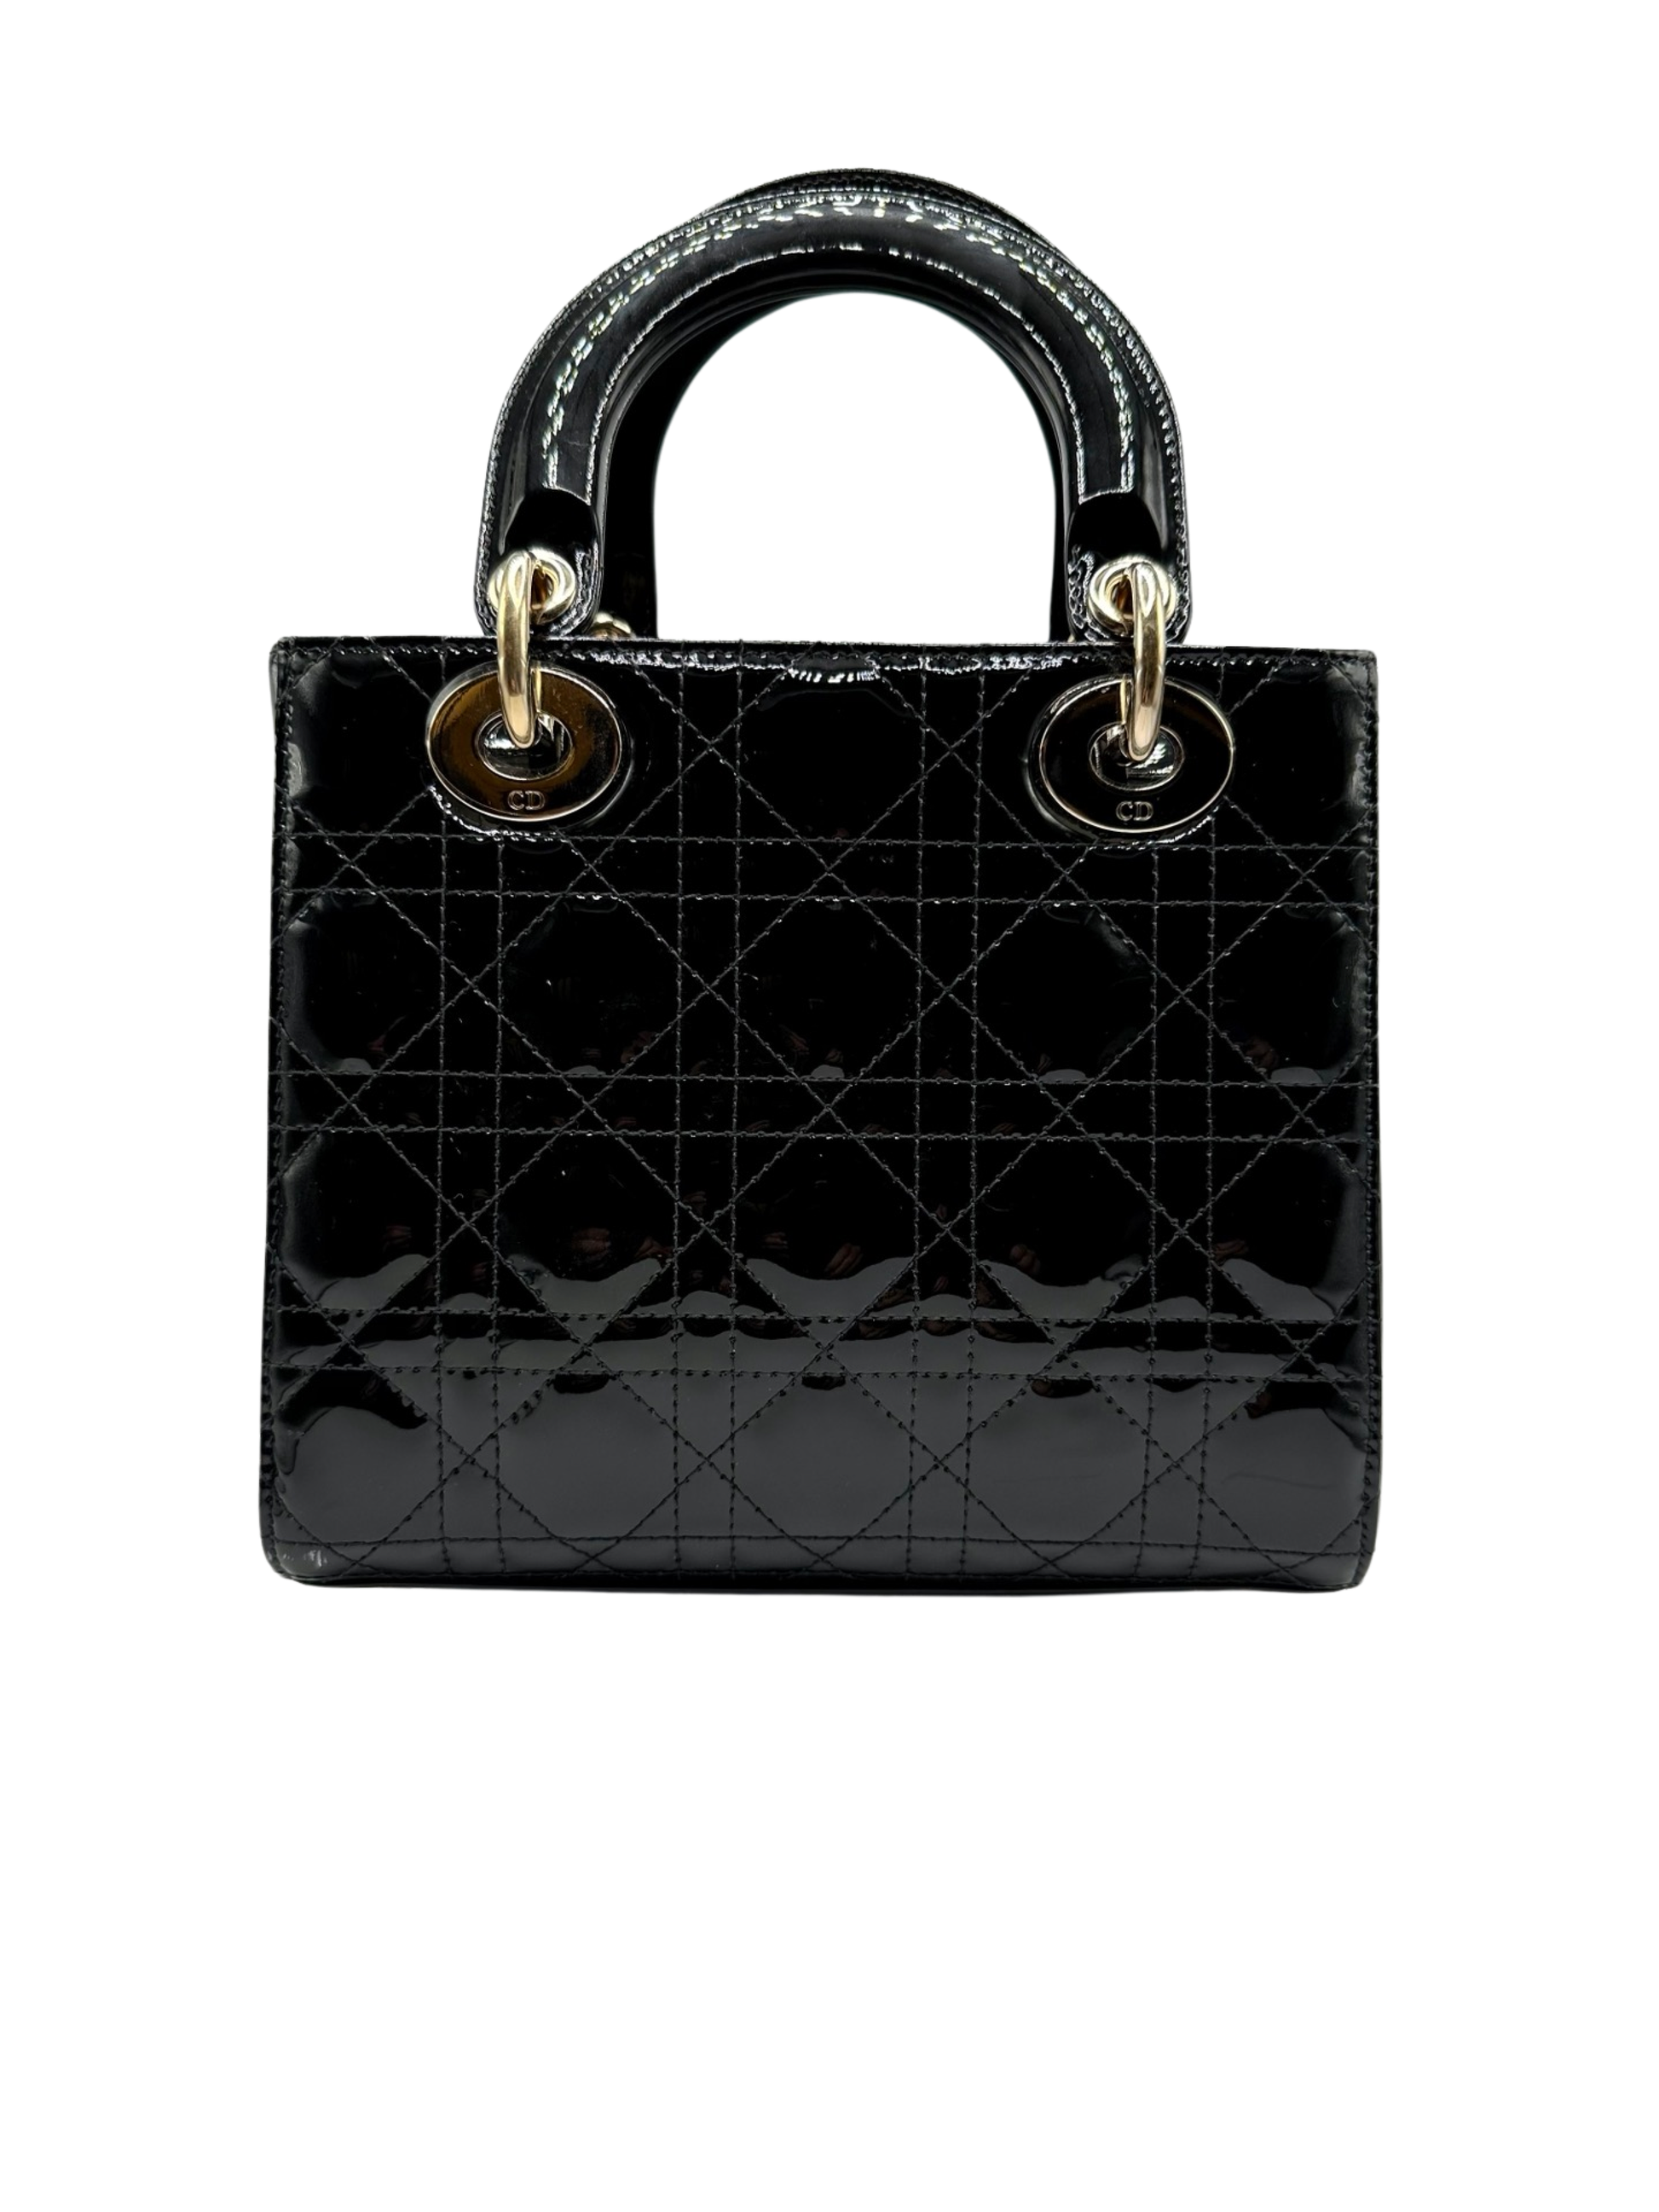 Back of small lady dior black patent leather bag